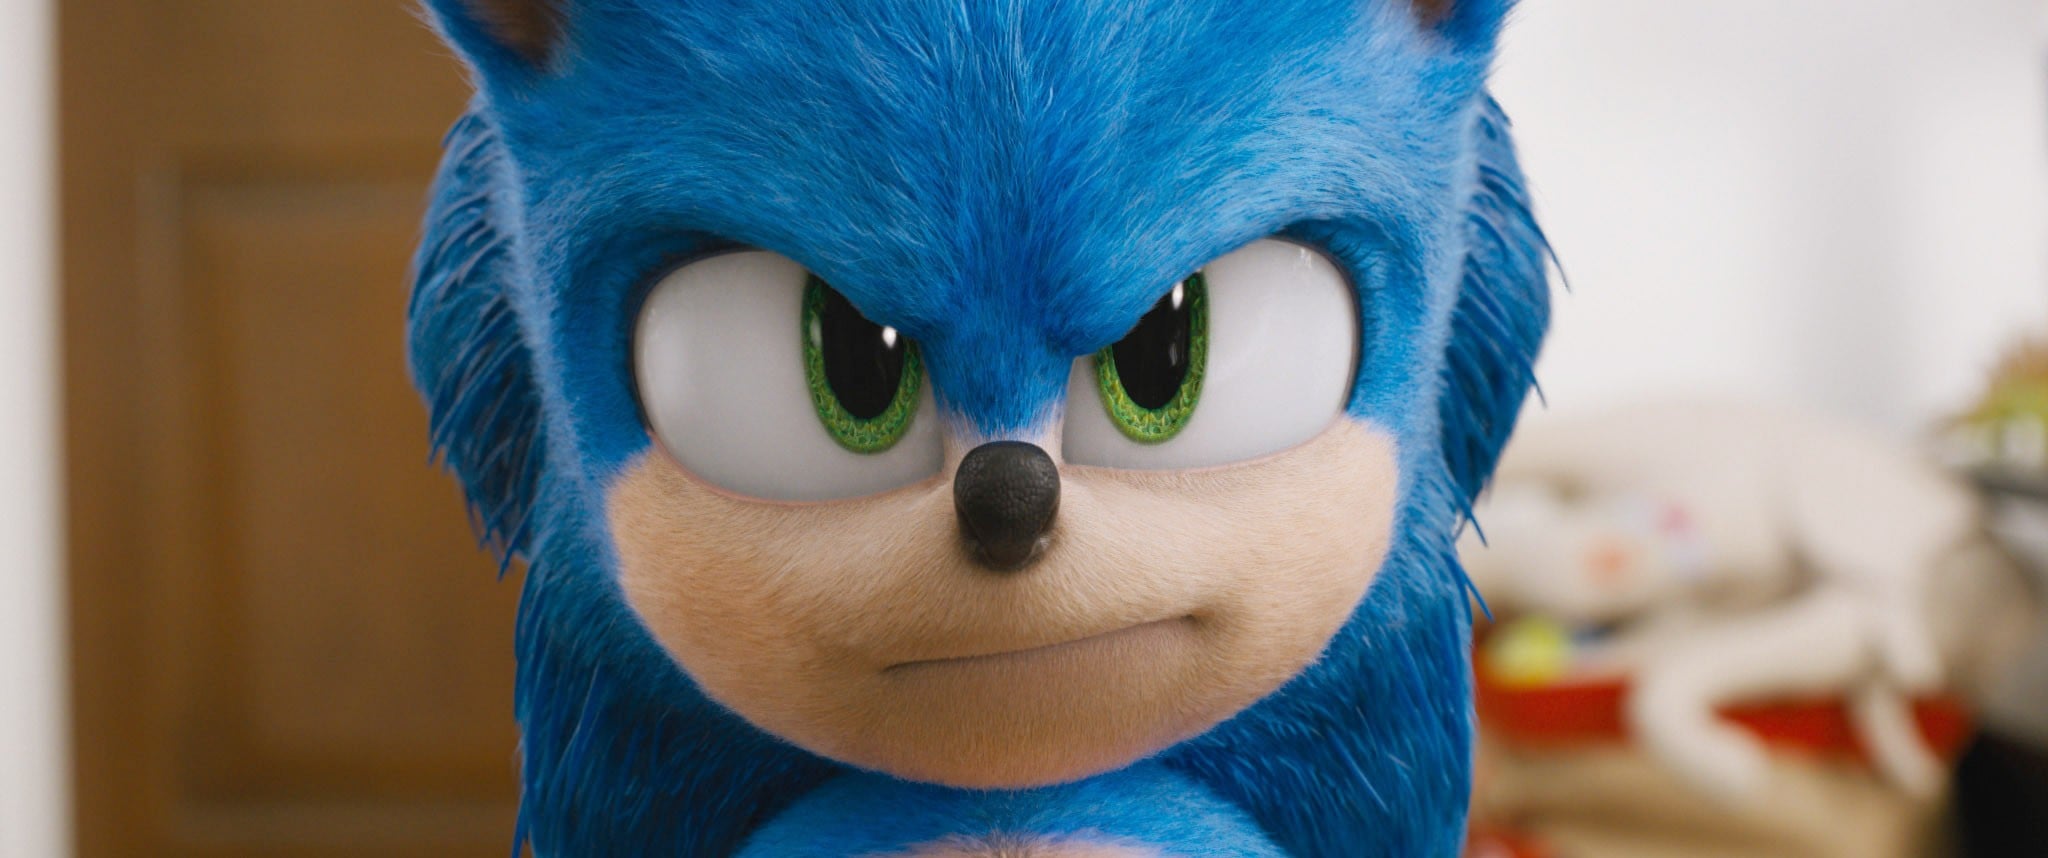 SONIC THE HEDGEHOG, Sonic the Hedgehog (voice: Ben Schwartz), 2020.  Paramount Pictures / courtesy Everett Collection